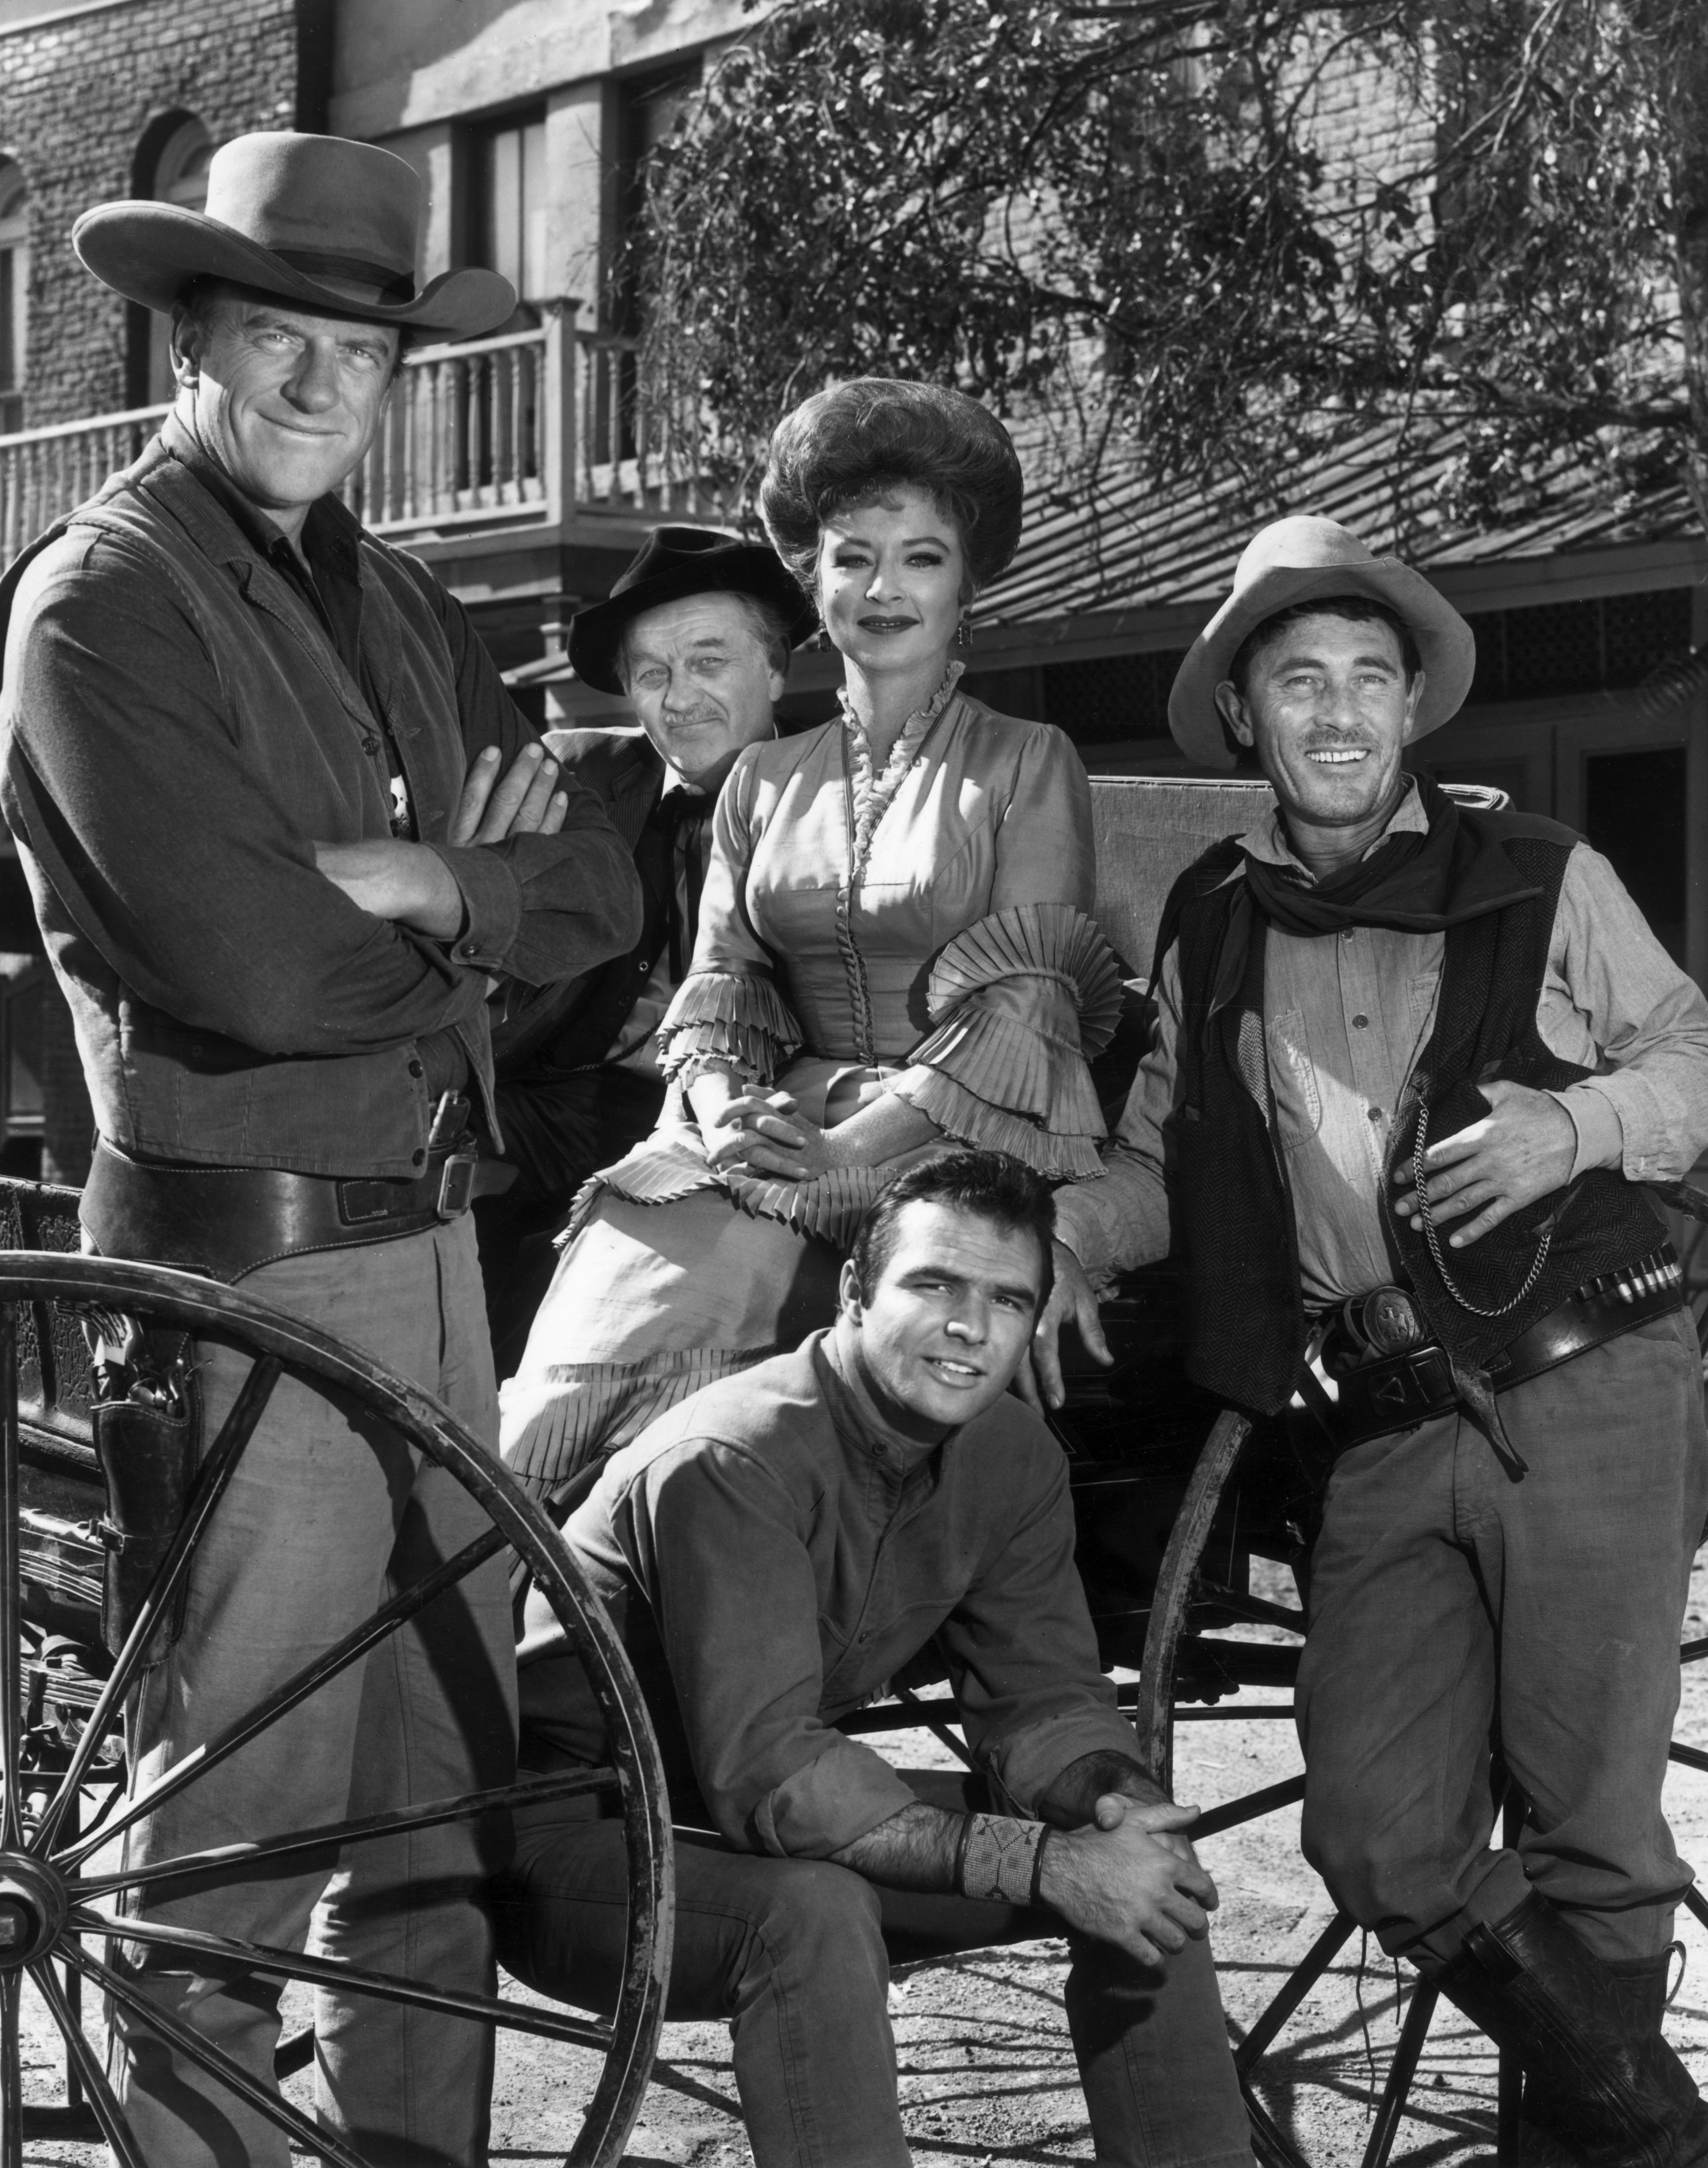 The cast of 'Gunsmoke' poses around a wagon in a promotional portrait for the Western television series. L-R: Actors James Arness, Milburn Stone, Amanda Blake, Ken Curtis and Burt Reynolds (seated). | Source: Getty Images